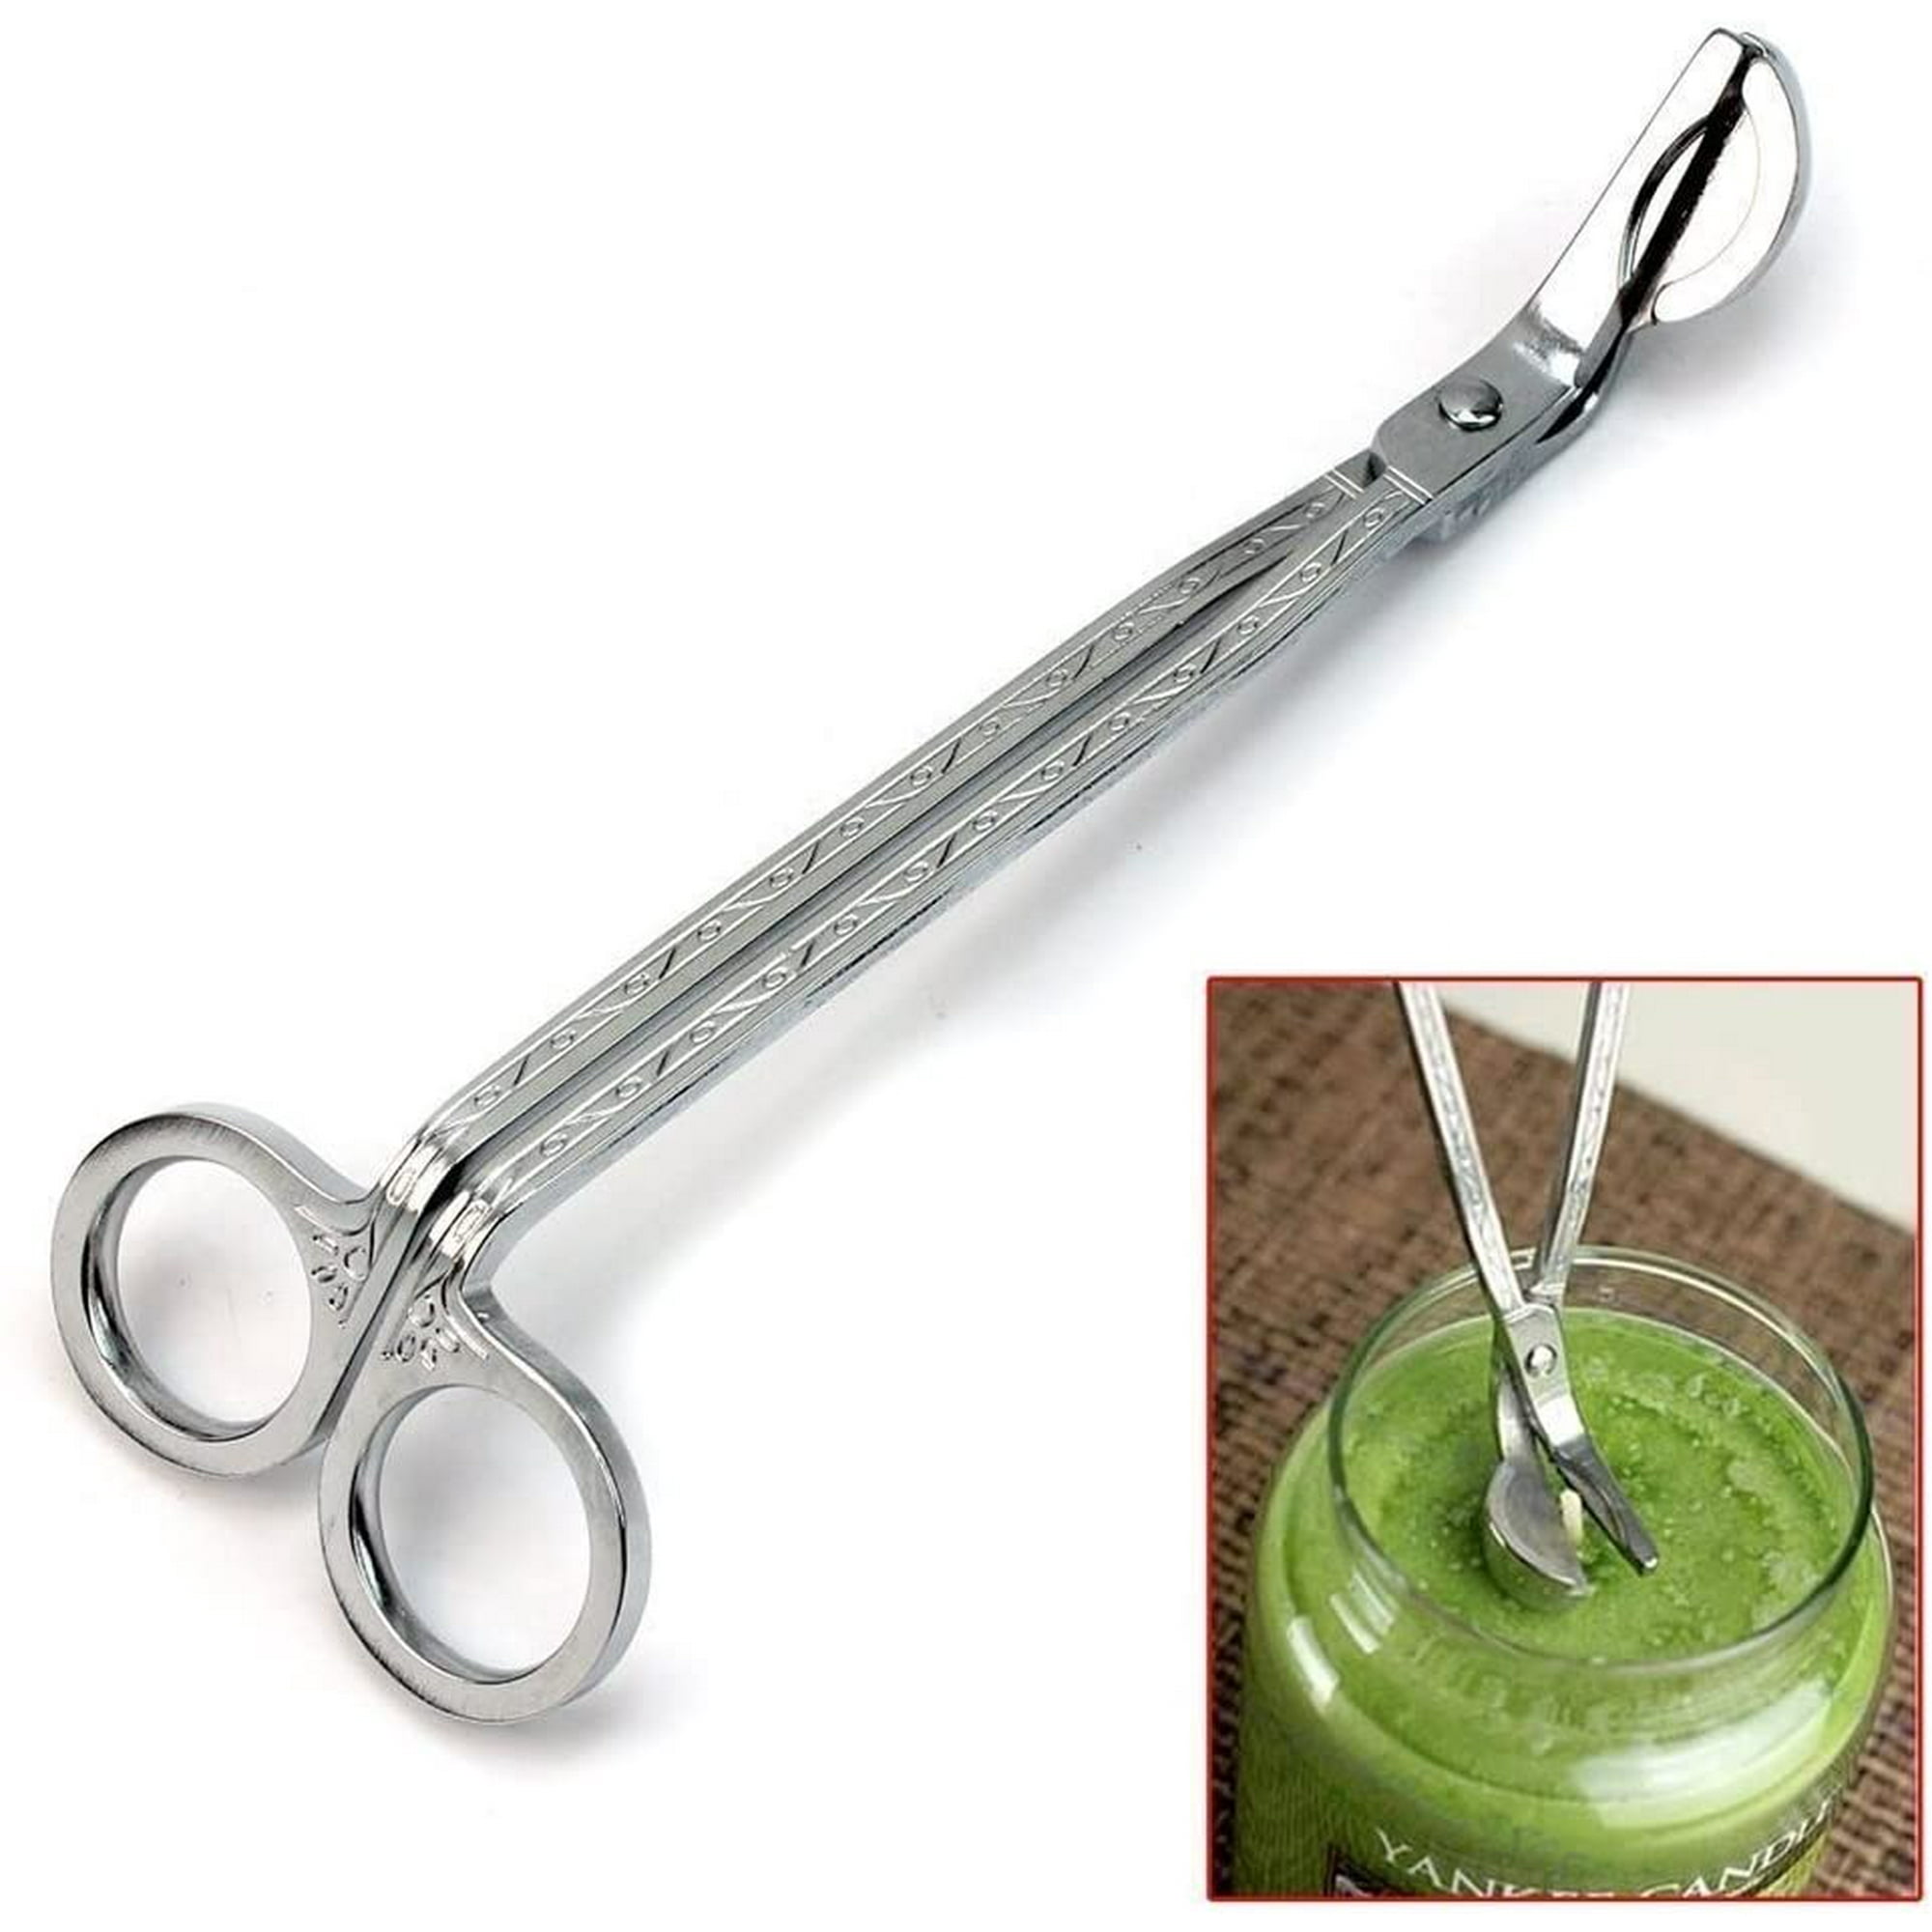 Candle wick cutter, made stainless steel, scissors, tools, simple candle tool, candle cutter, silver | Walmart Canada